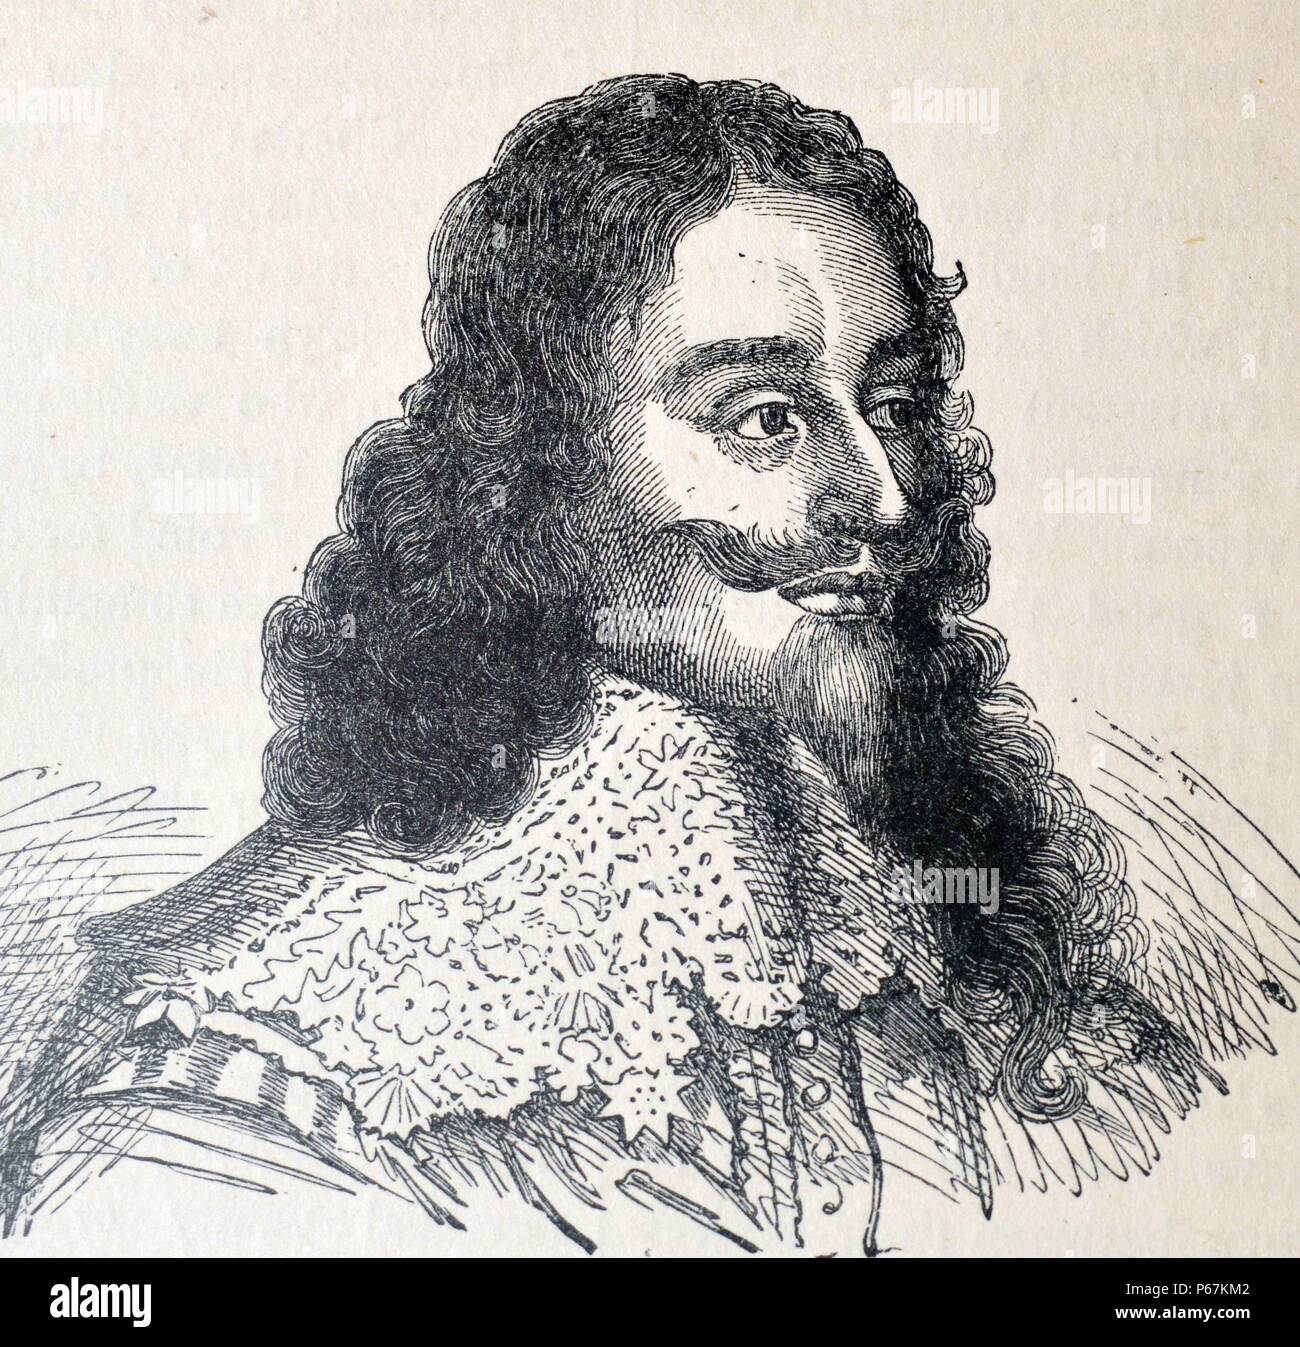 Engraving of Charles I of England (1600-1649) monarch of the three kingdoms of England, Scotland, and Ireland from 27 March 1625 until his execution in 1649. Dated 17th Century Stock Photo